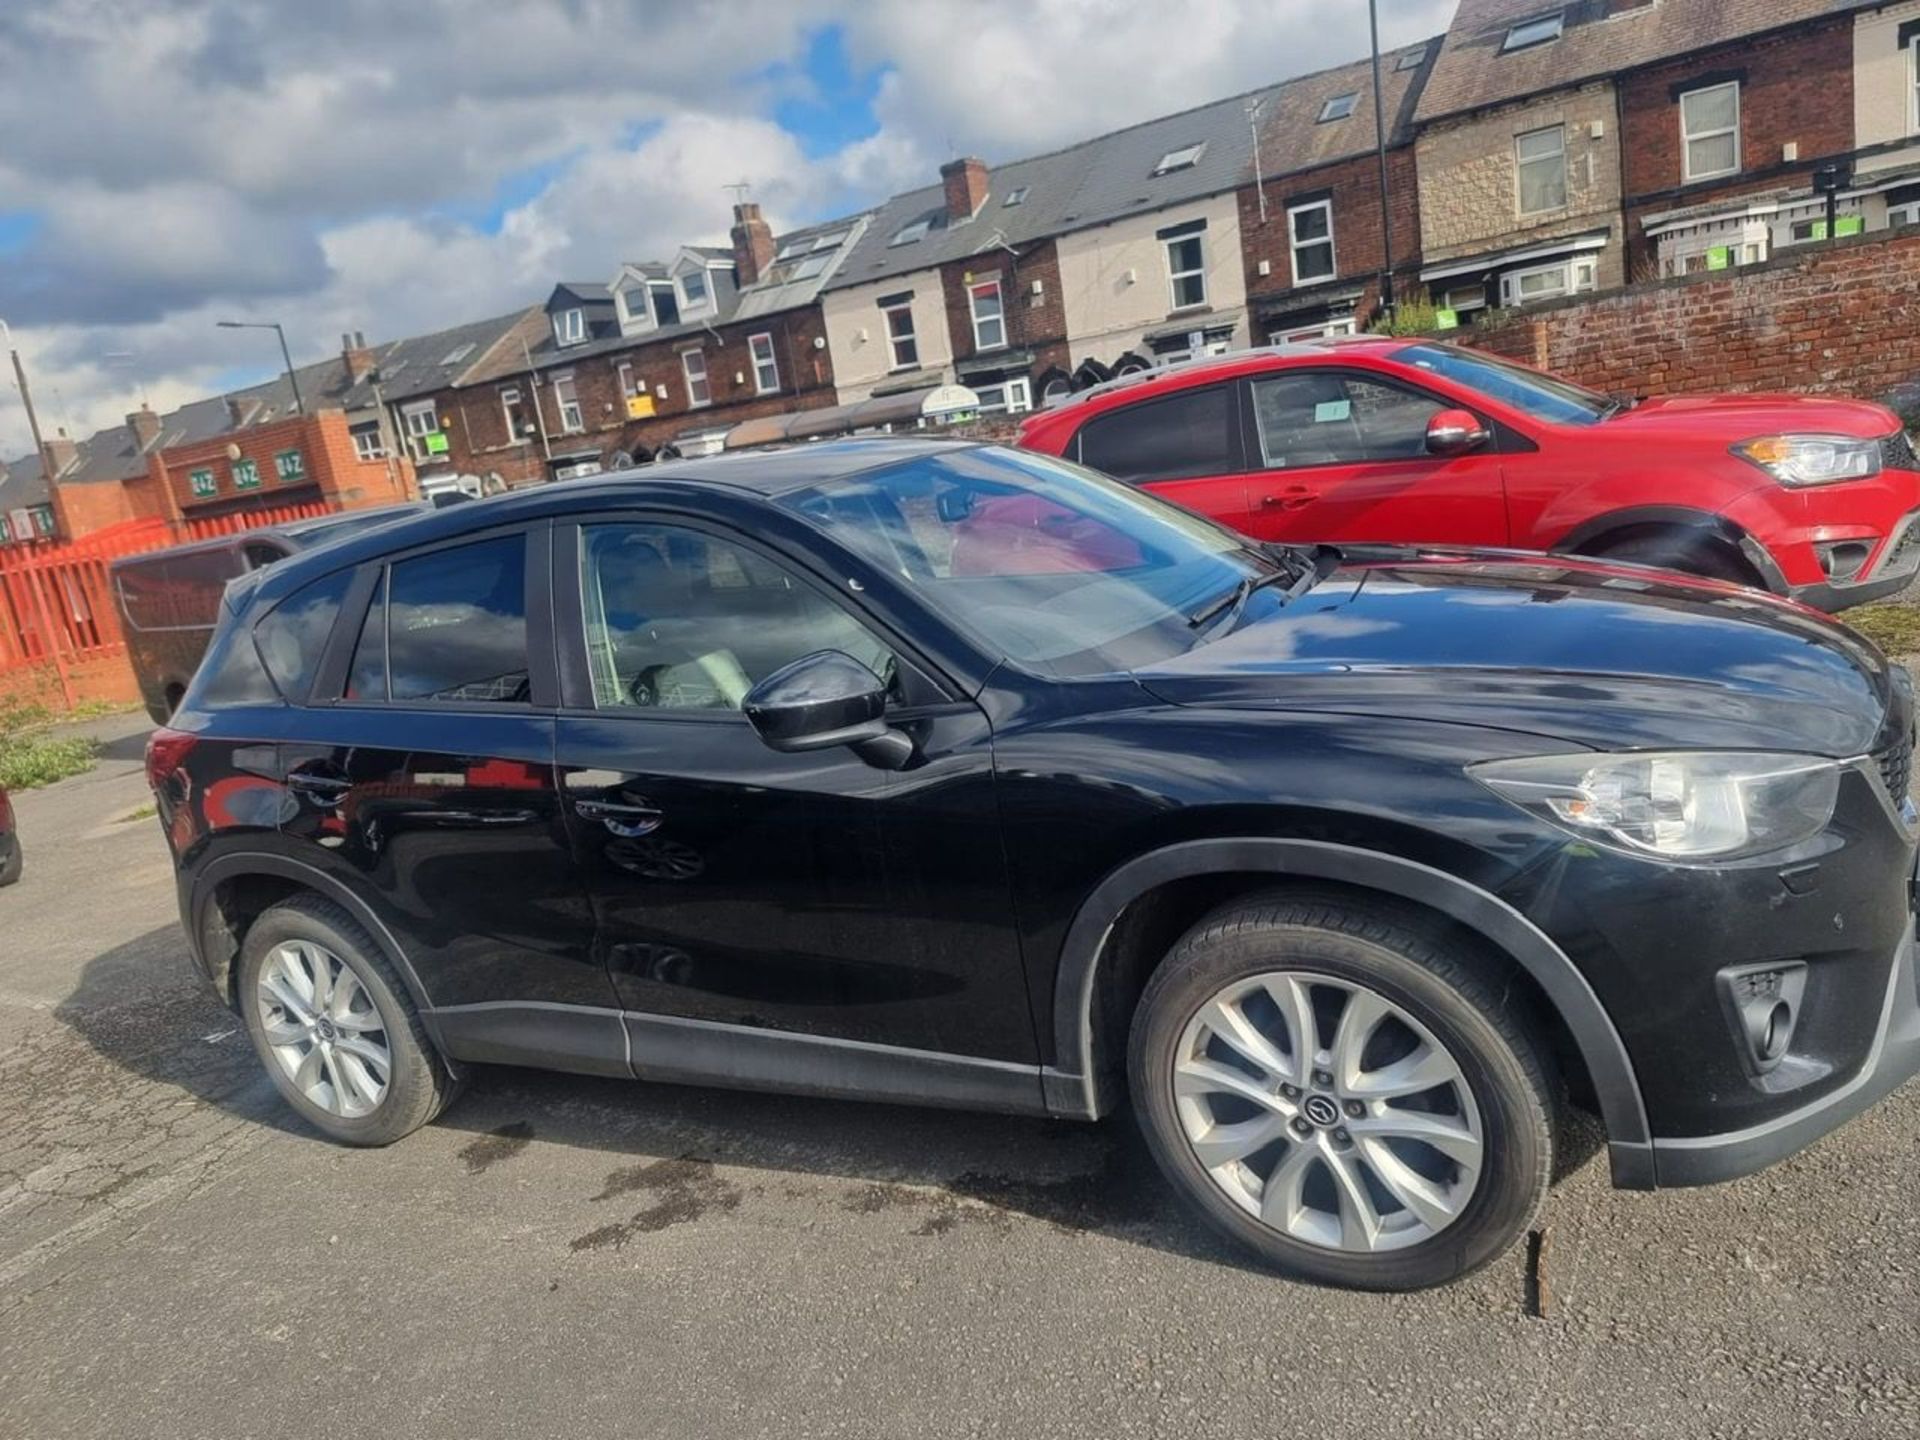 FG13 JOH MAZDA CX-5 2.2 D 150 SPORT 2WD Station Wagon. Comes with 1 key. Date of registration: 21/ - Image 2 of 9